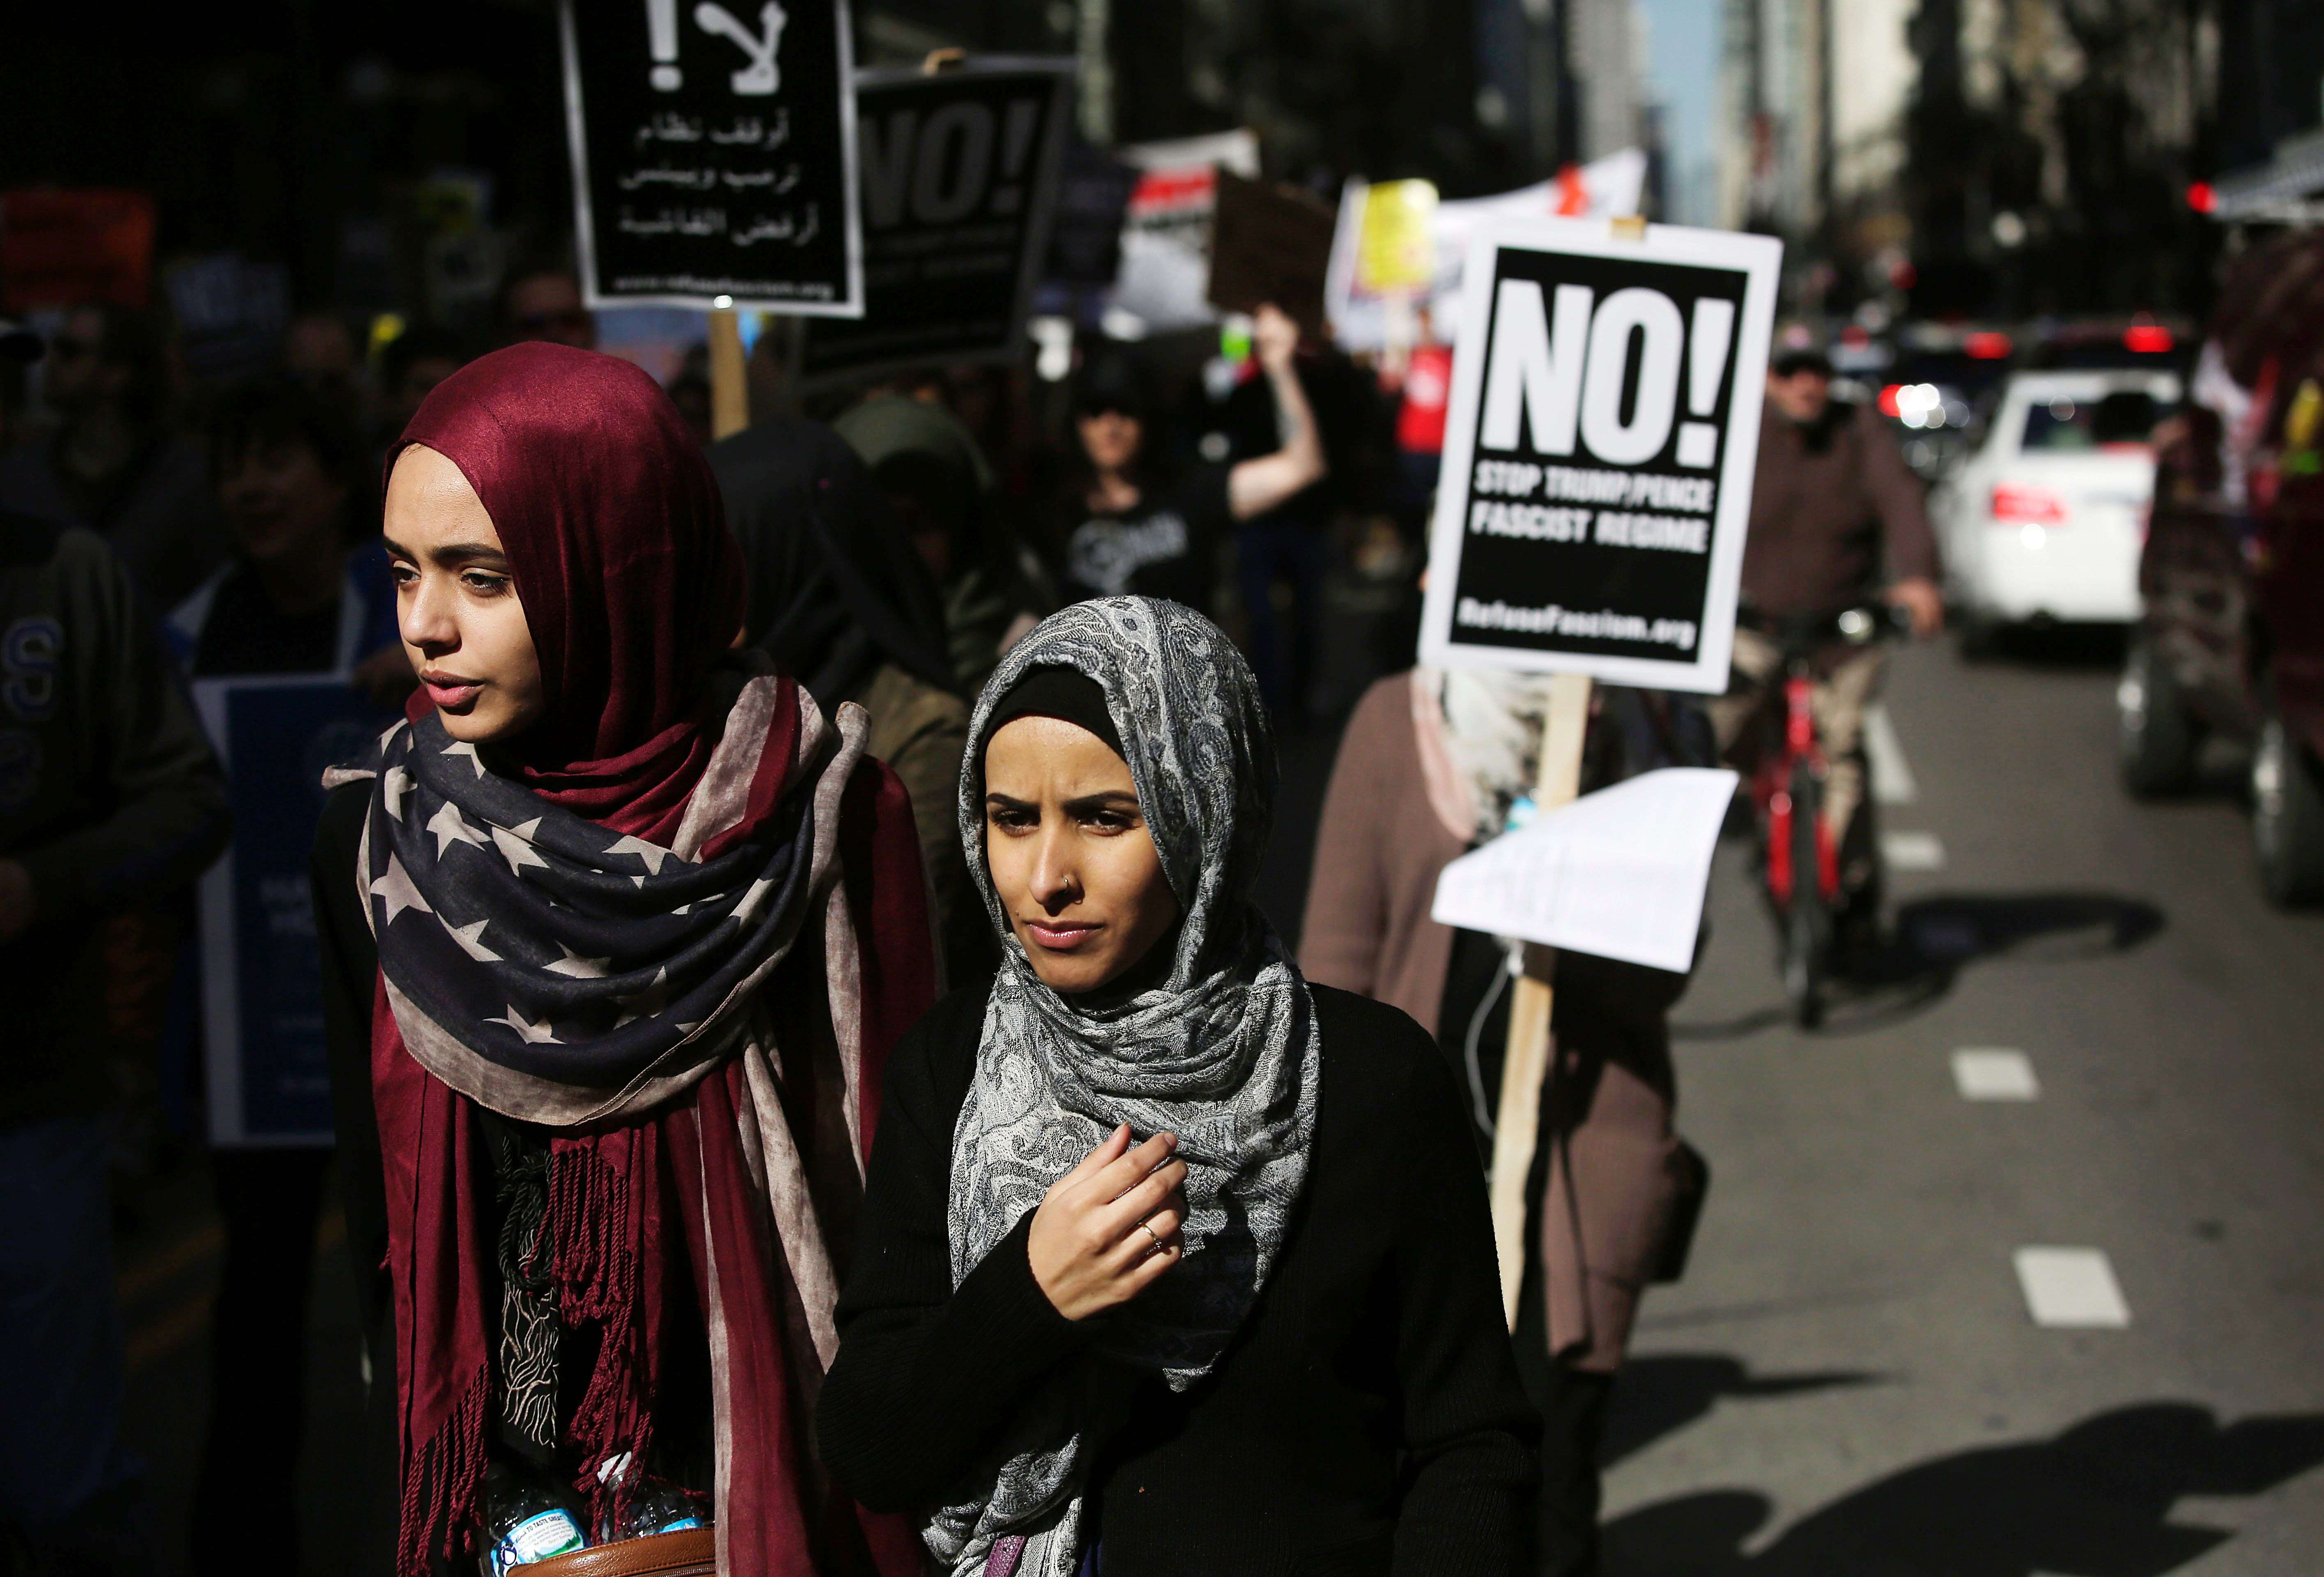 Muslim women protest against US President Donald Trump on February 19 in Chicago, Illinois. Anti-Muslim ideologues have for years treated Islam as a non-religion that threatens American life and law through a violent ideology of sharia. Photo: AFP